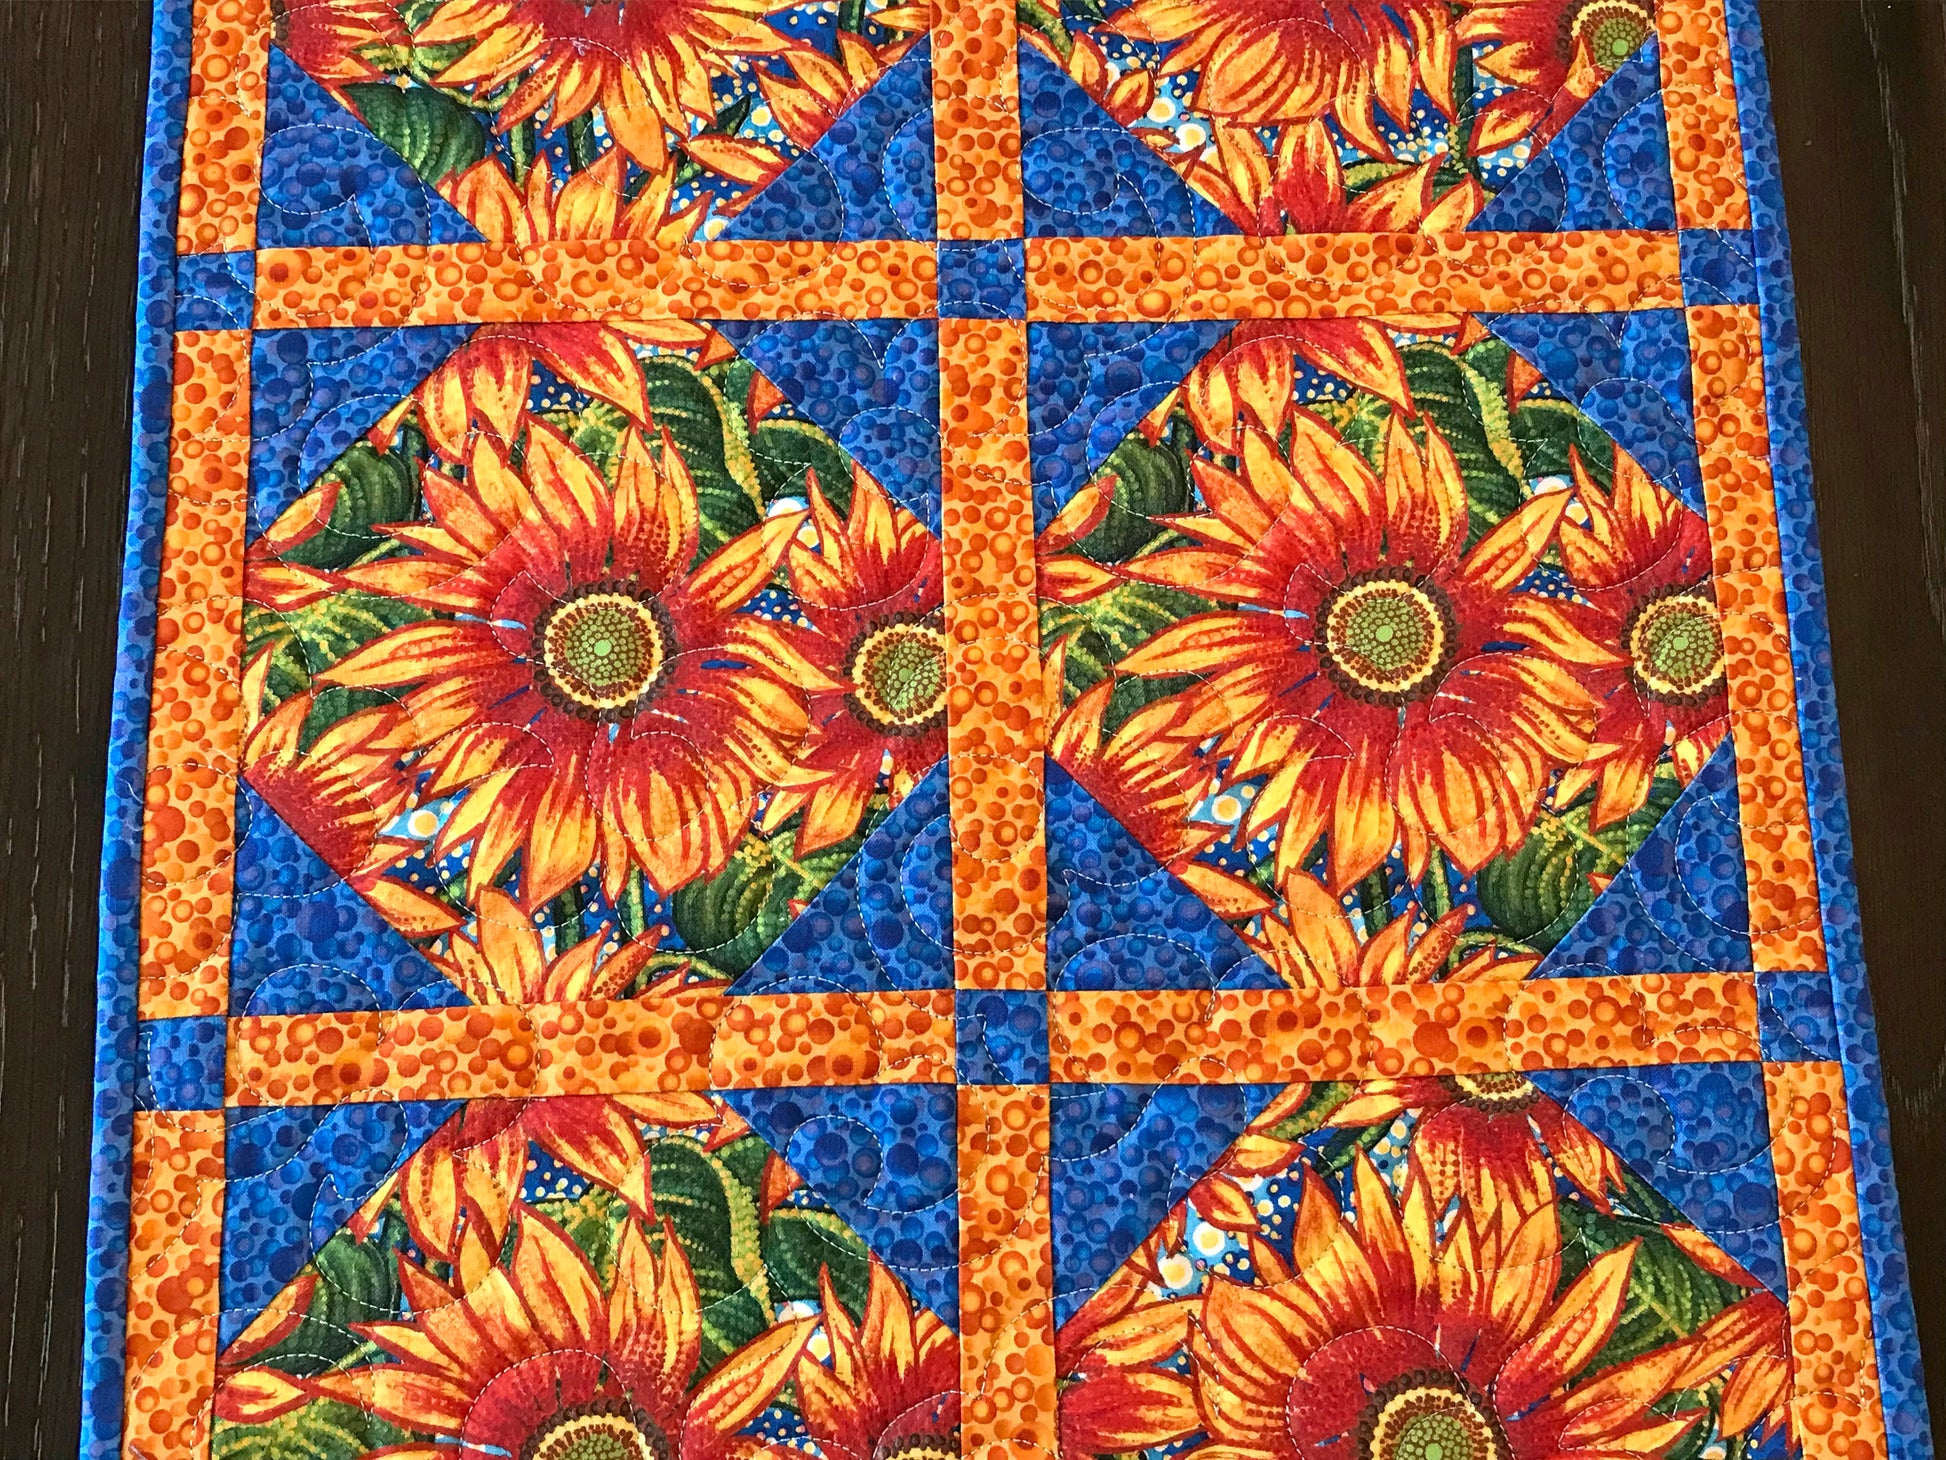 Kaleidoscope Table Runner and Table Topper Pattern - Digital Pattern - Handmade Quilts, Digital Patterns, and Home Décor items online - Cuddle Cat Quiltworks